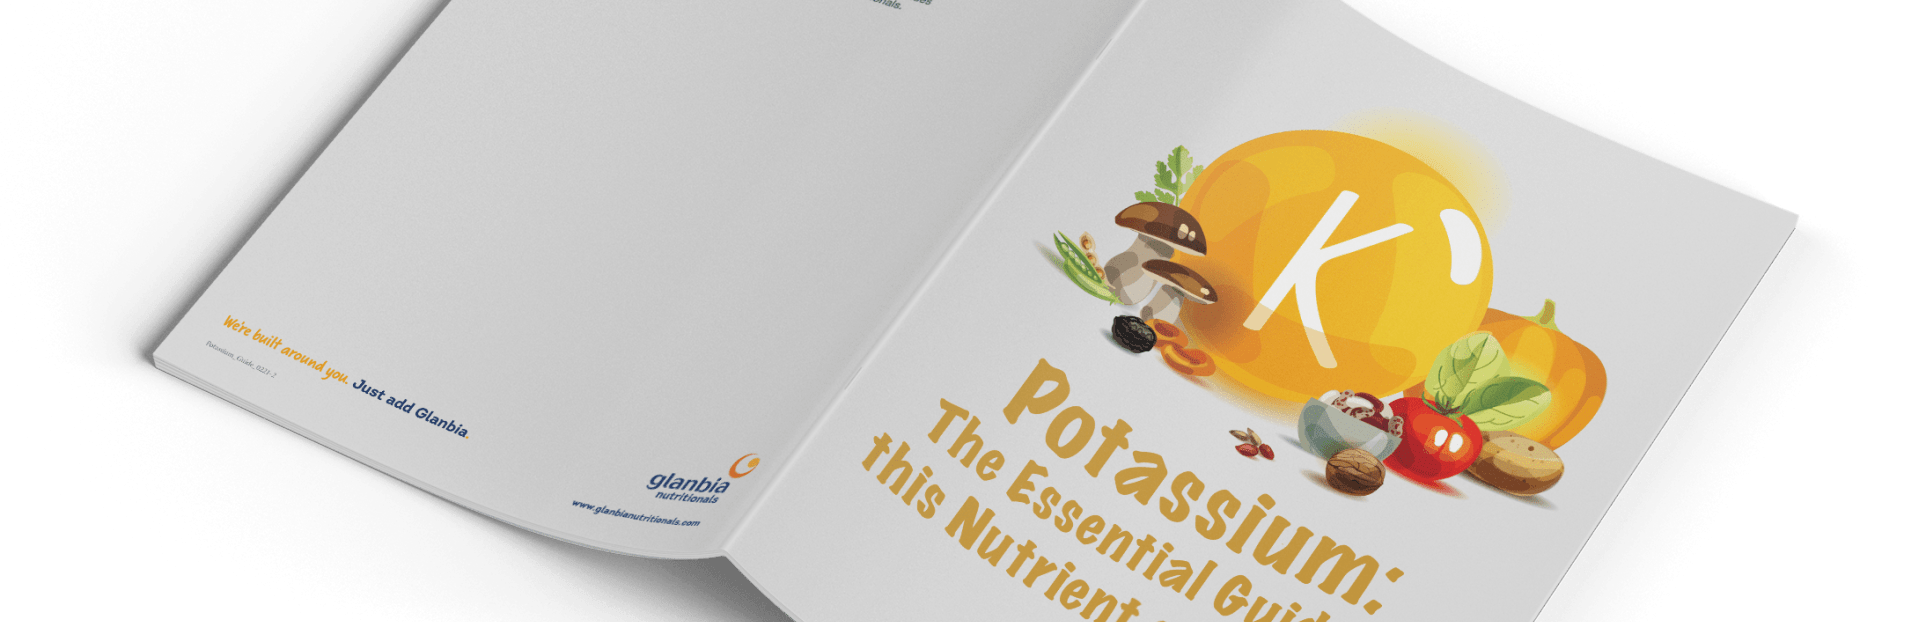 Potassium The Essential Guide to this Nutrient of Concern